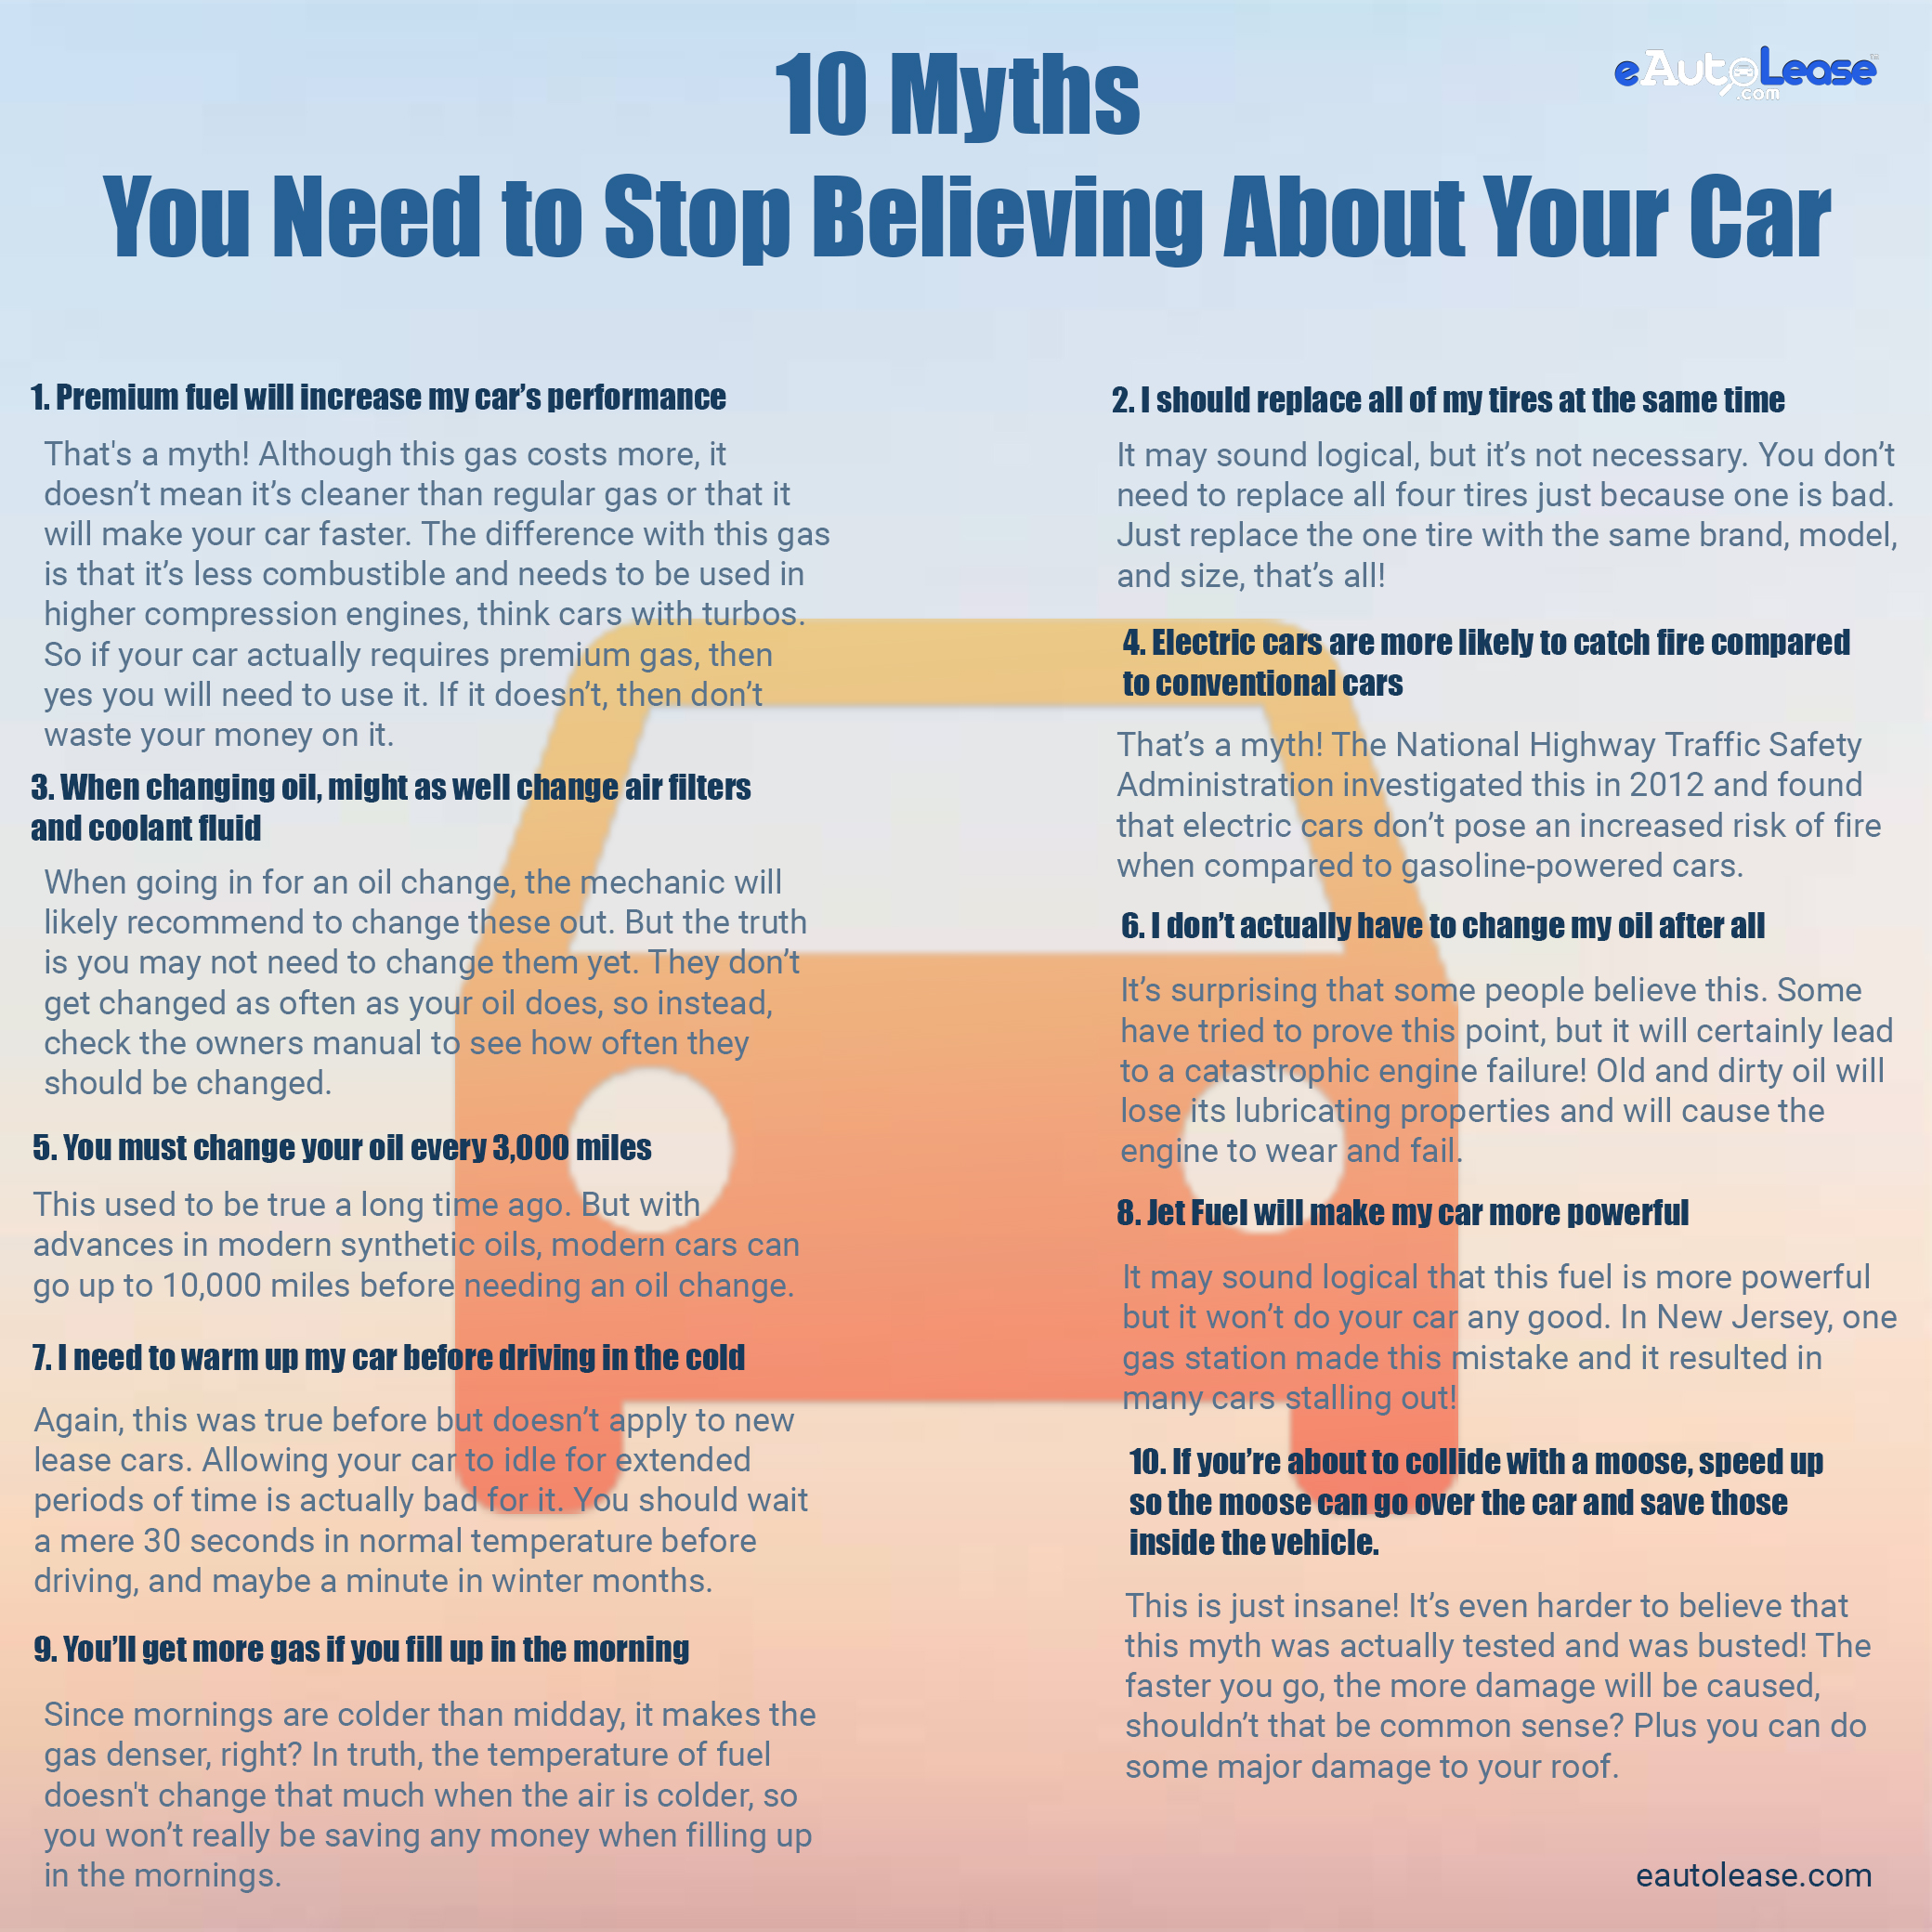 how to lease a car